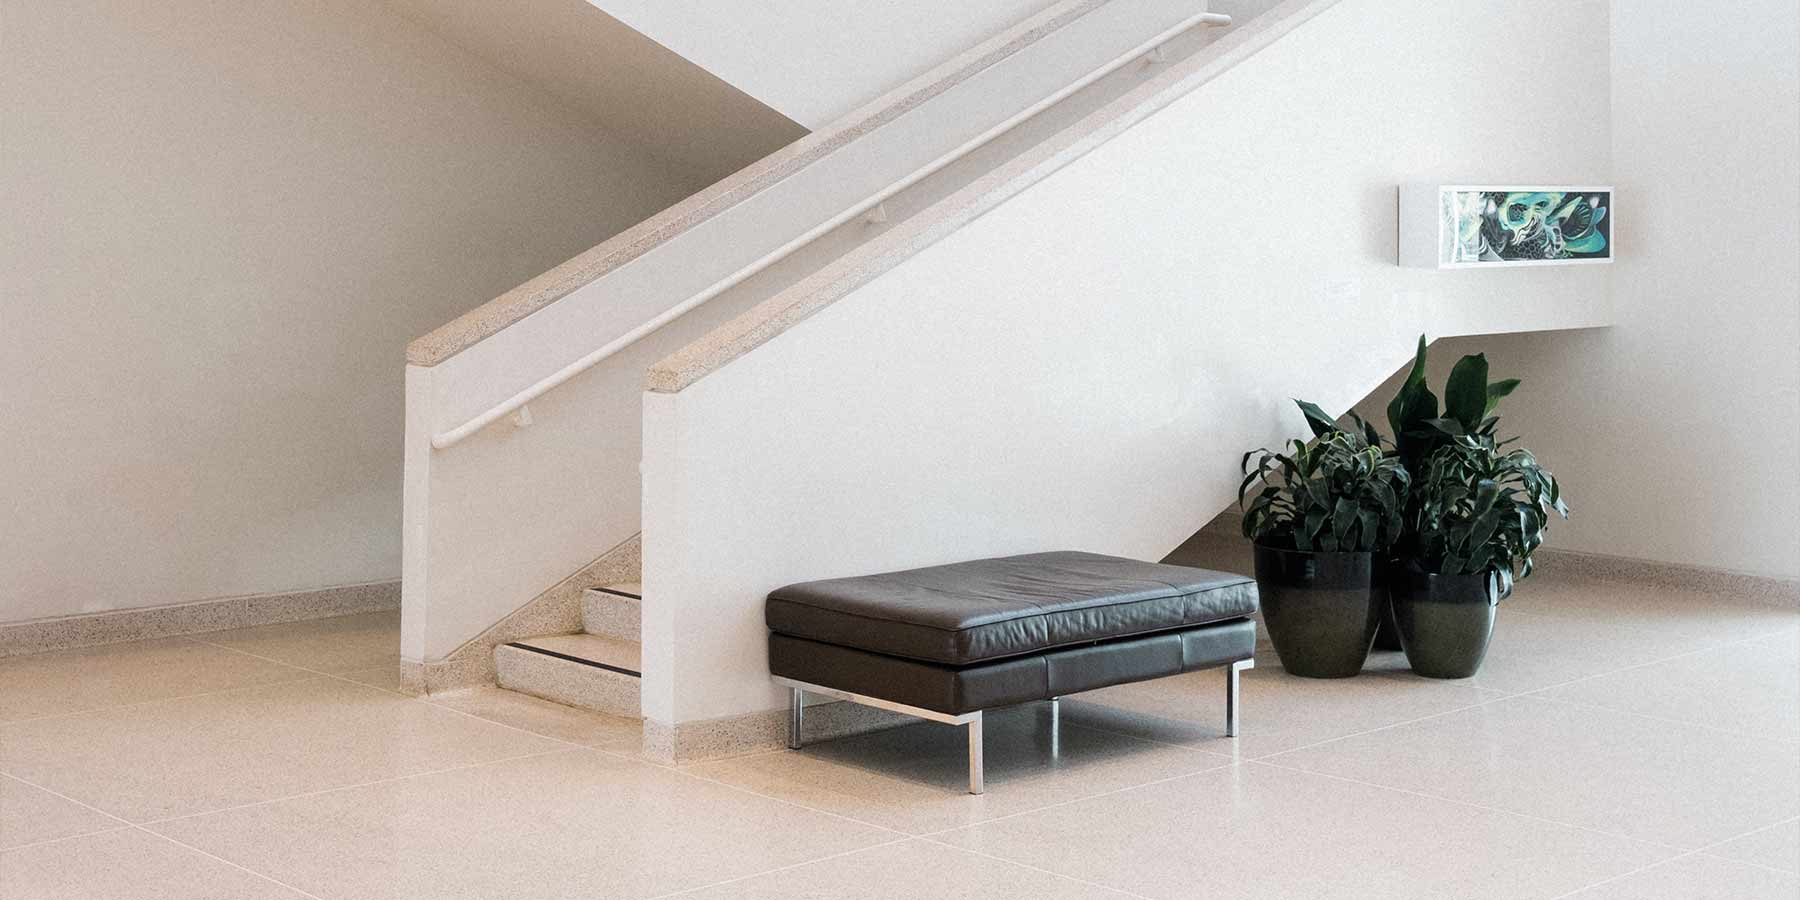 Interior concrete staircase with a leather stool and plants on the floor level